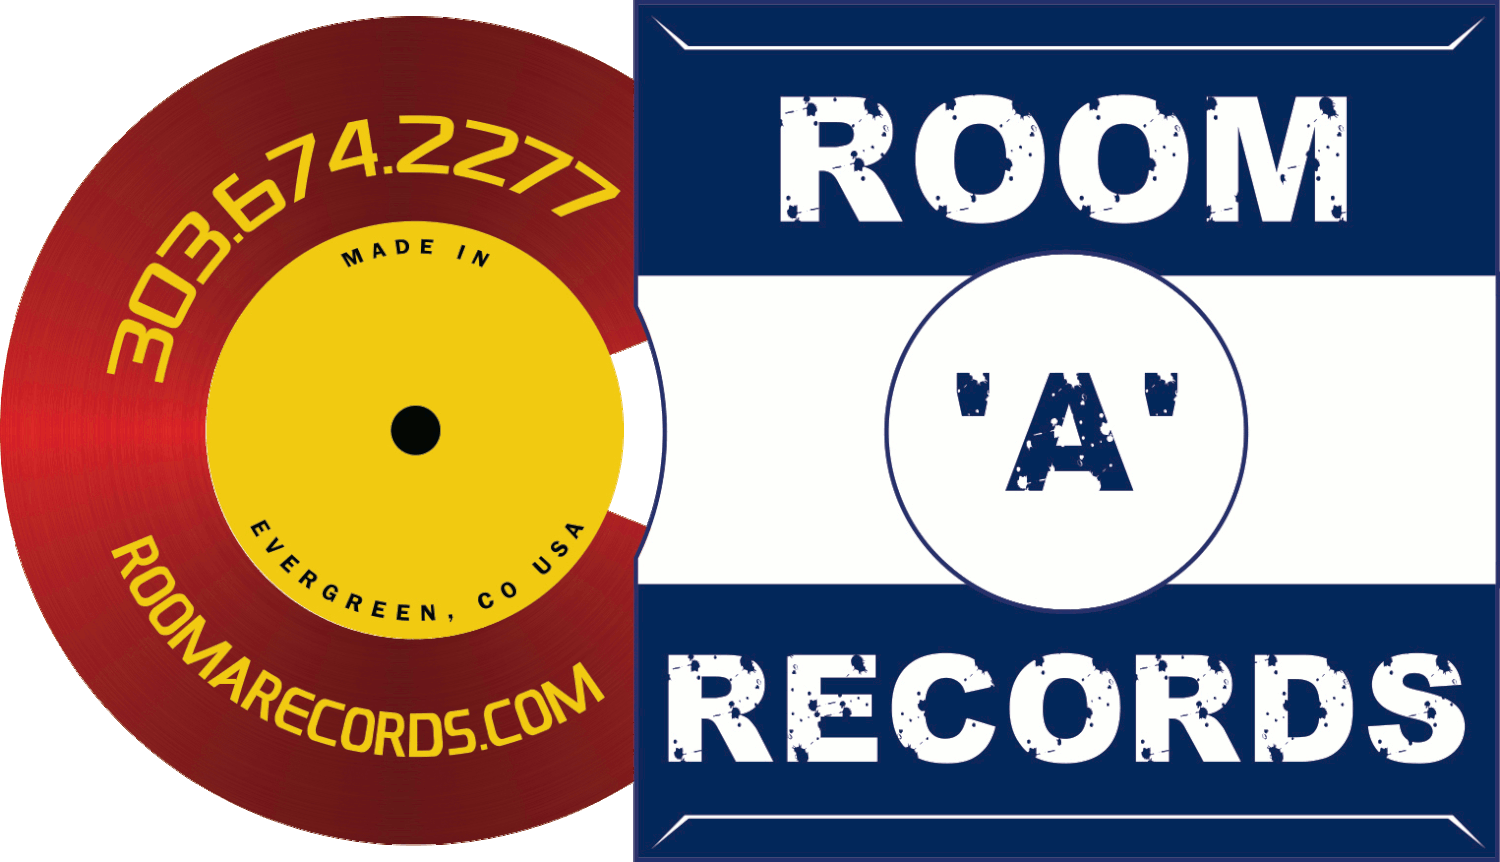 Room 'A' Records Private Music Lessons in Evergreen CO for Adults and Kids, Recording Studio